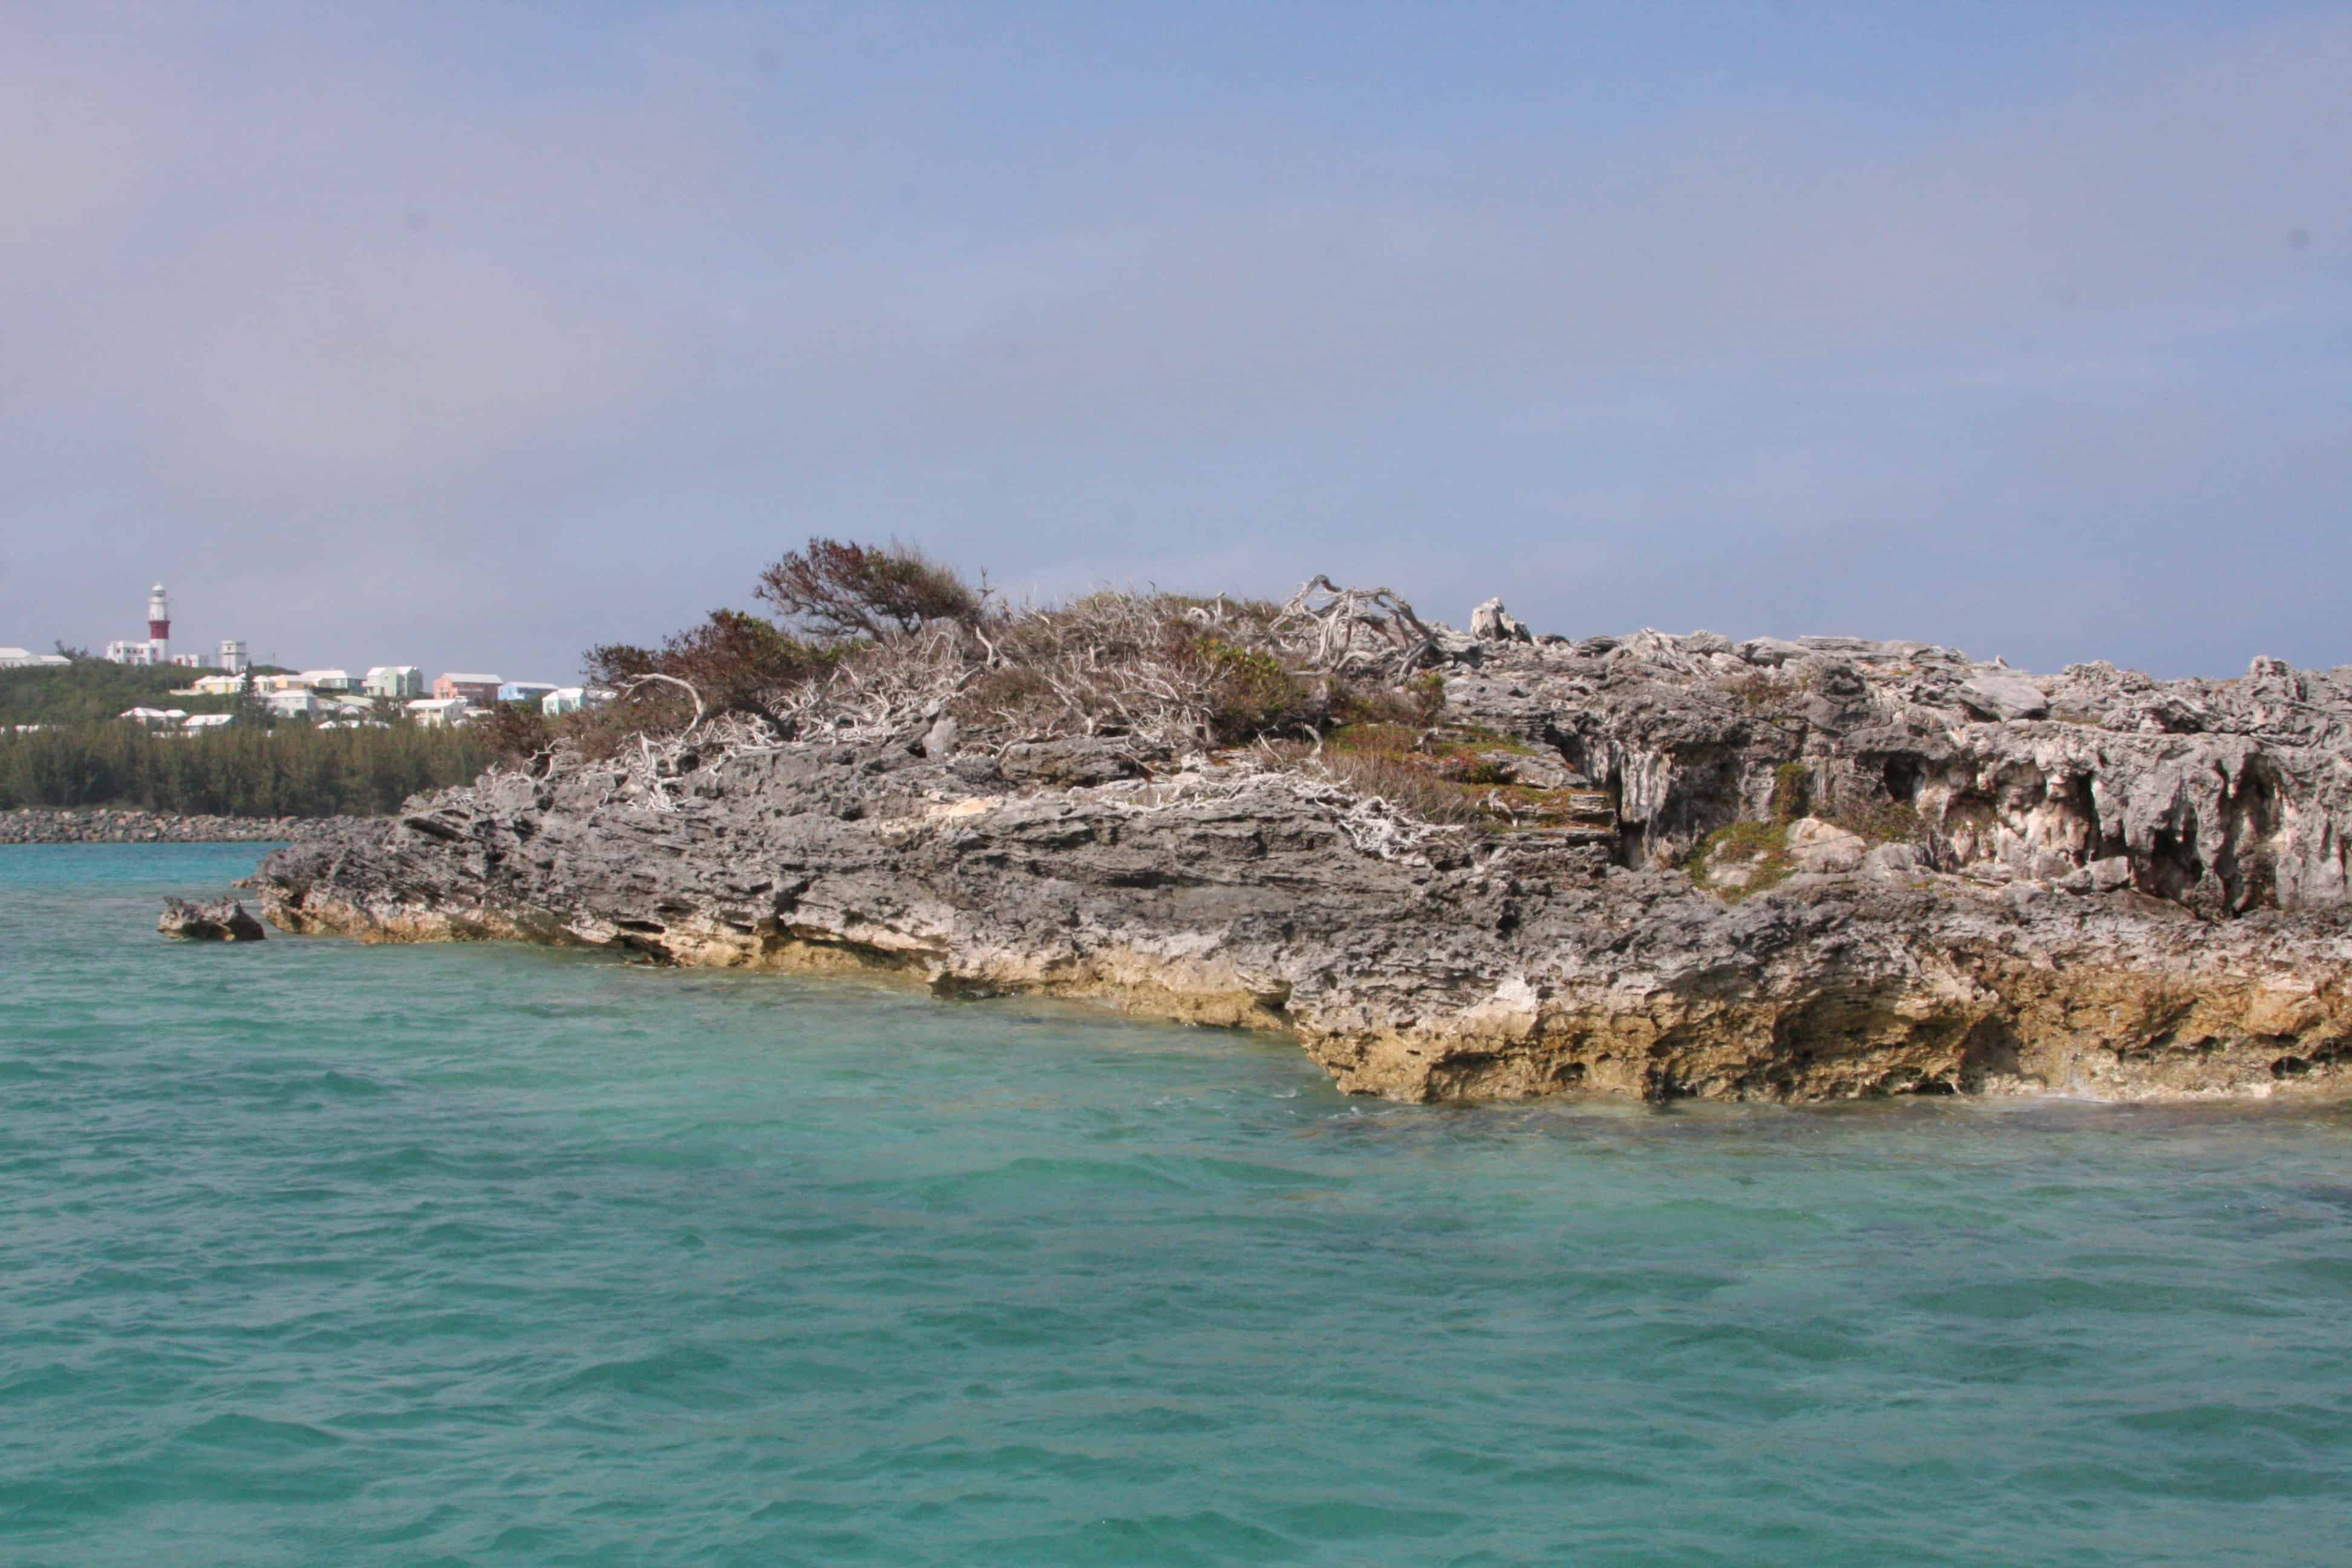 Just off Bermuda, one of the tiny islets in which the Bermuda petrels continued to return in the night to nest in holes for over 300 years while thought to be extinct. Copyright: Dr Mike Pienkowski